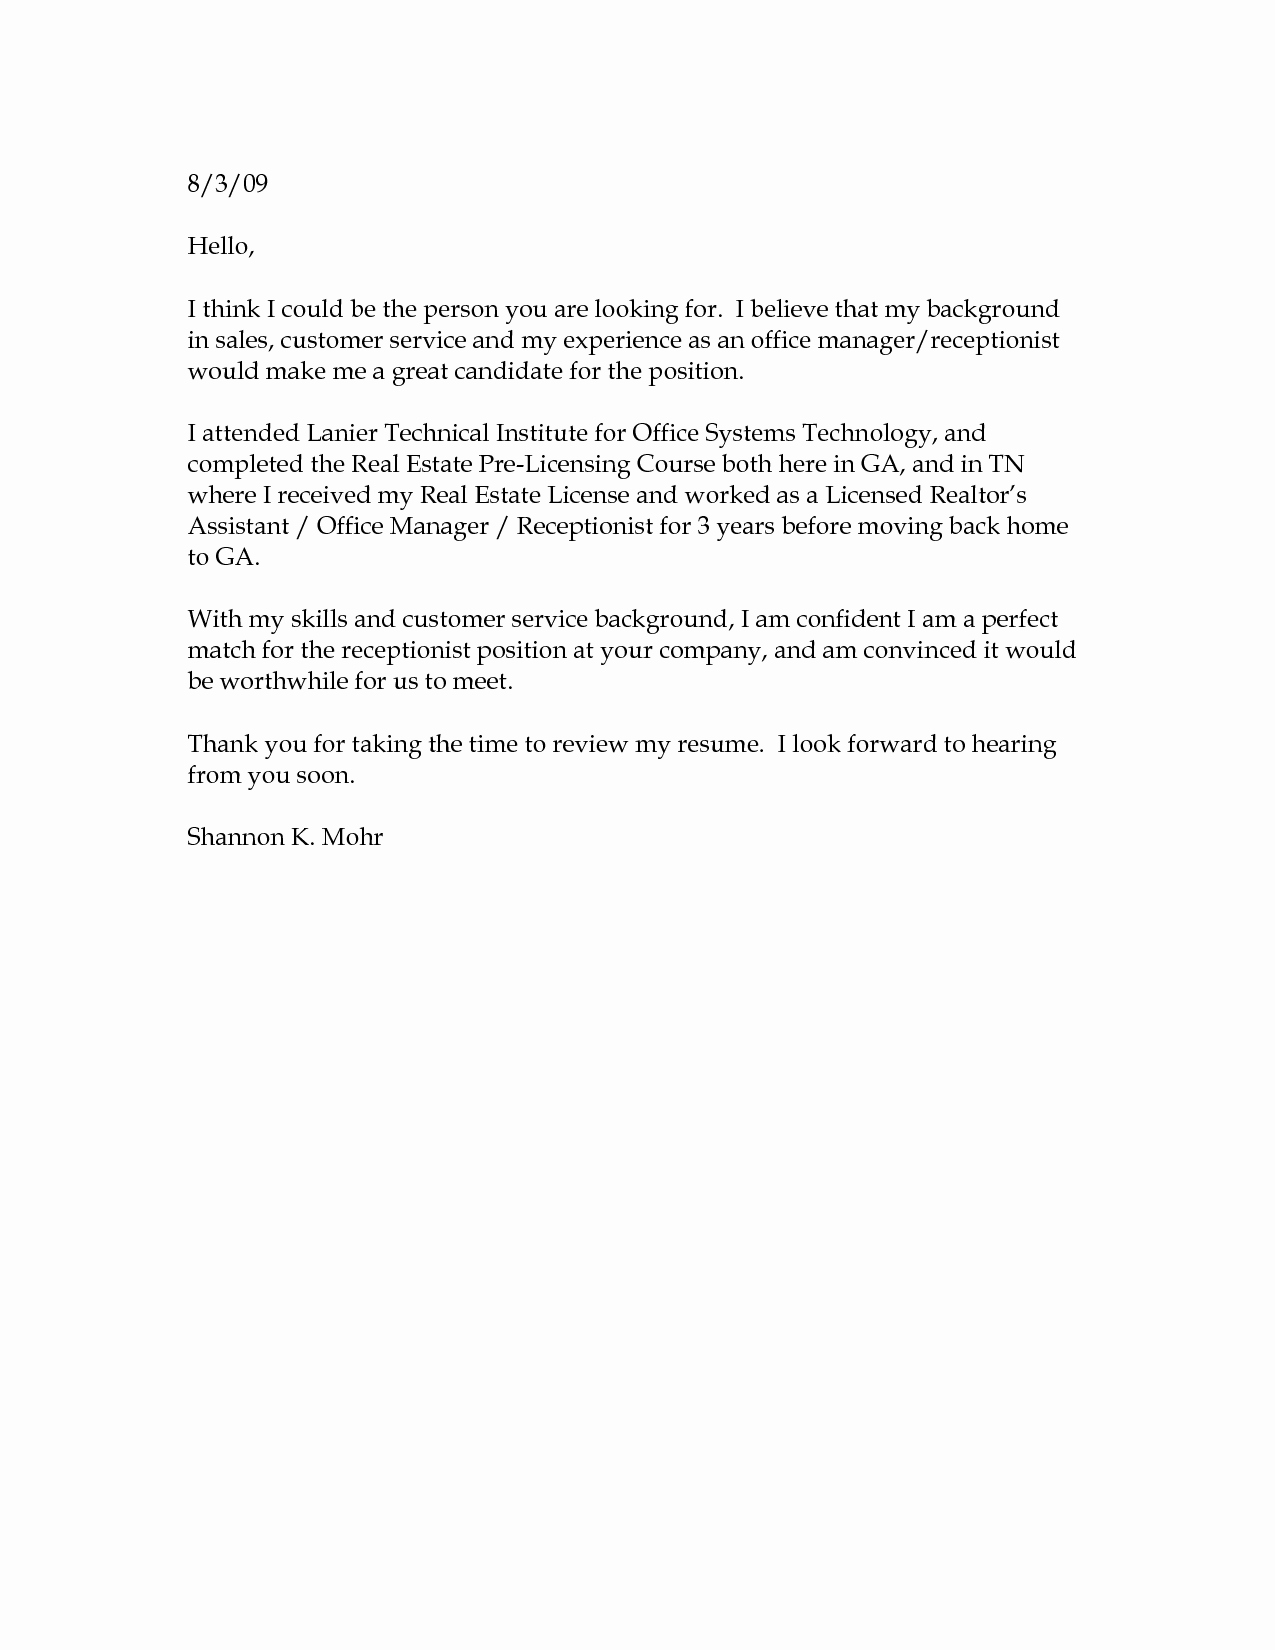 Simple Cover Letter format Beautiful Covering Letter Example Simple Cover Letter Examplesimple